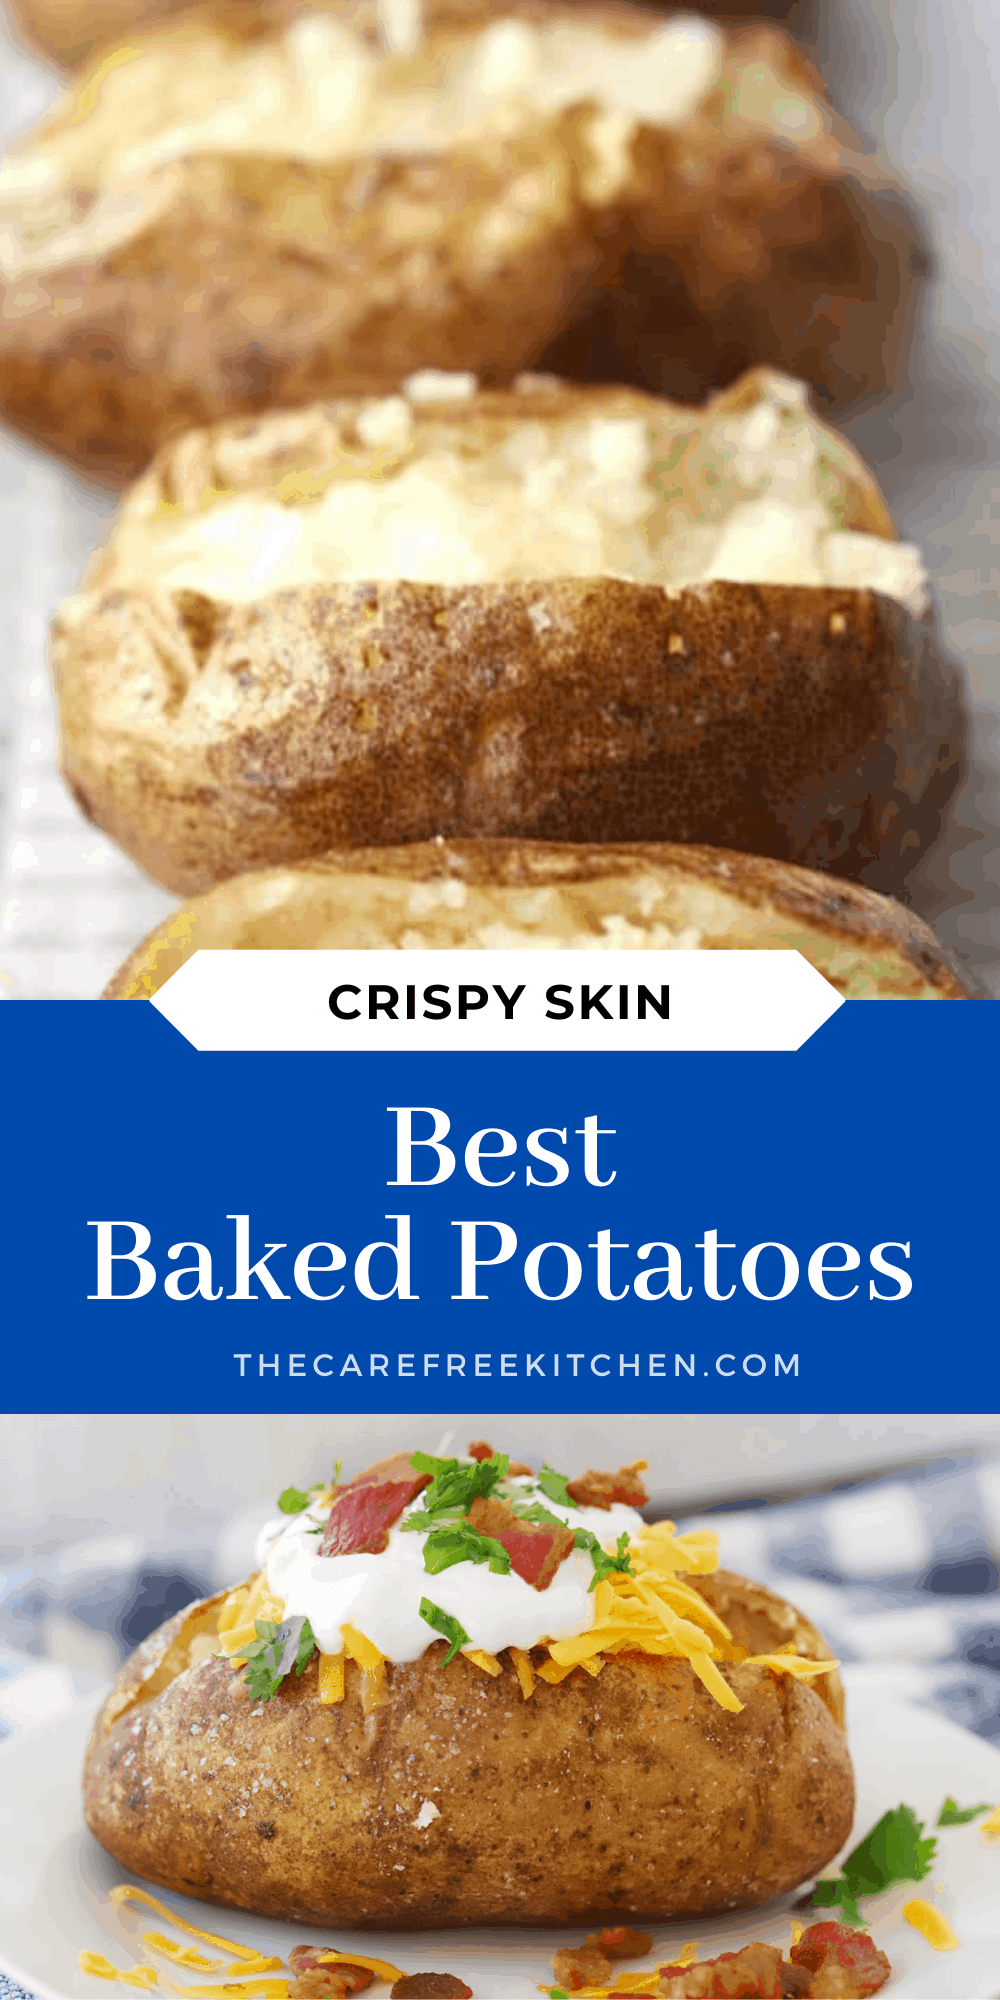 Best Steakhouse Baked Potatoes - The Carefree Kitchen